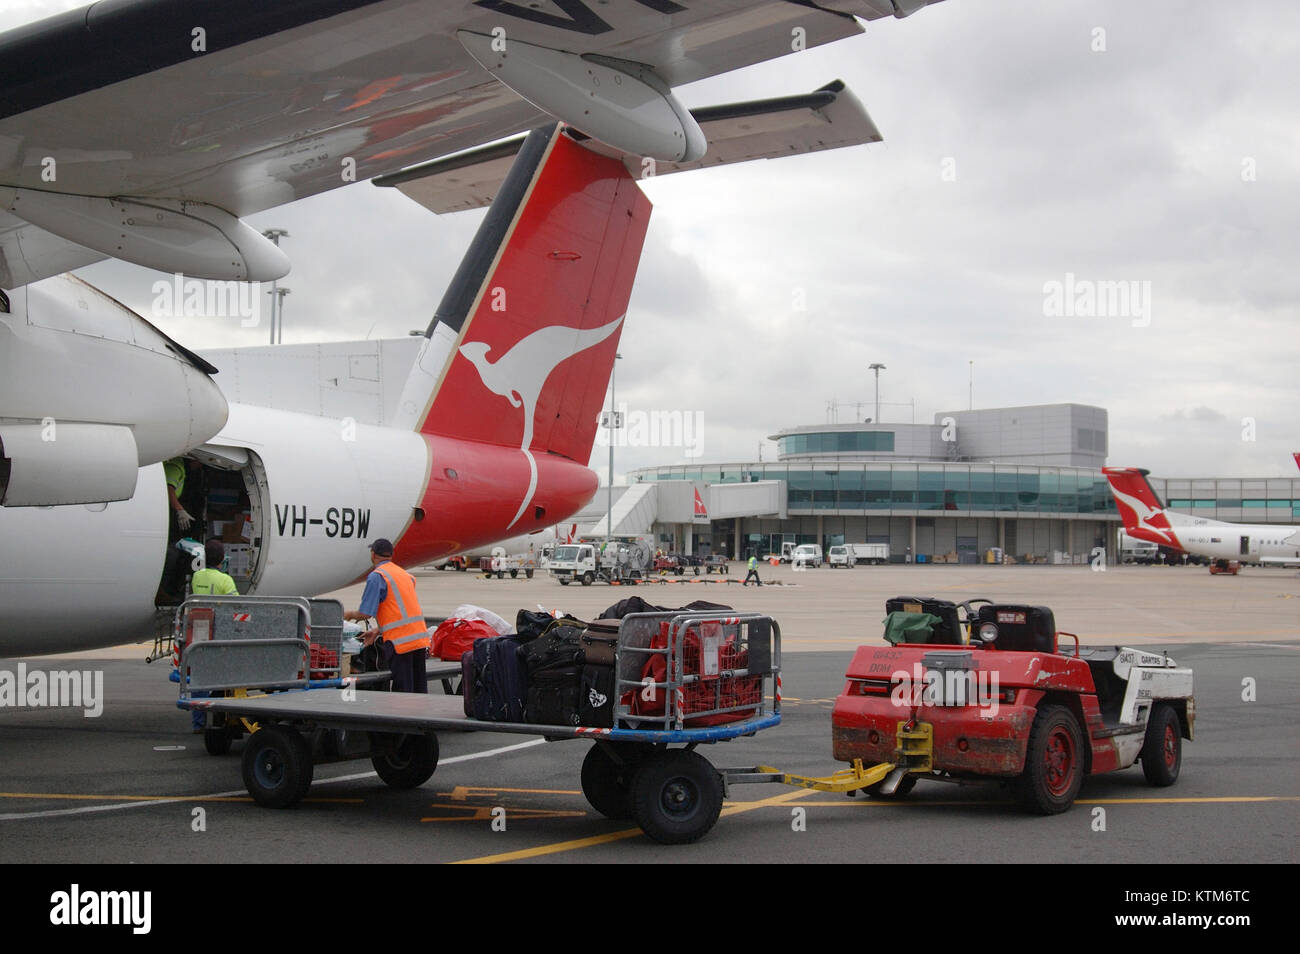 BRISBANE, AUSTRALIA, September 24, 2008: Baggage handlers load aircraft at Brisbane Domestic Airpport Terminal on September 24, 2008 in Brisbane, Aust Stock Photo